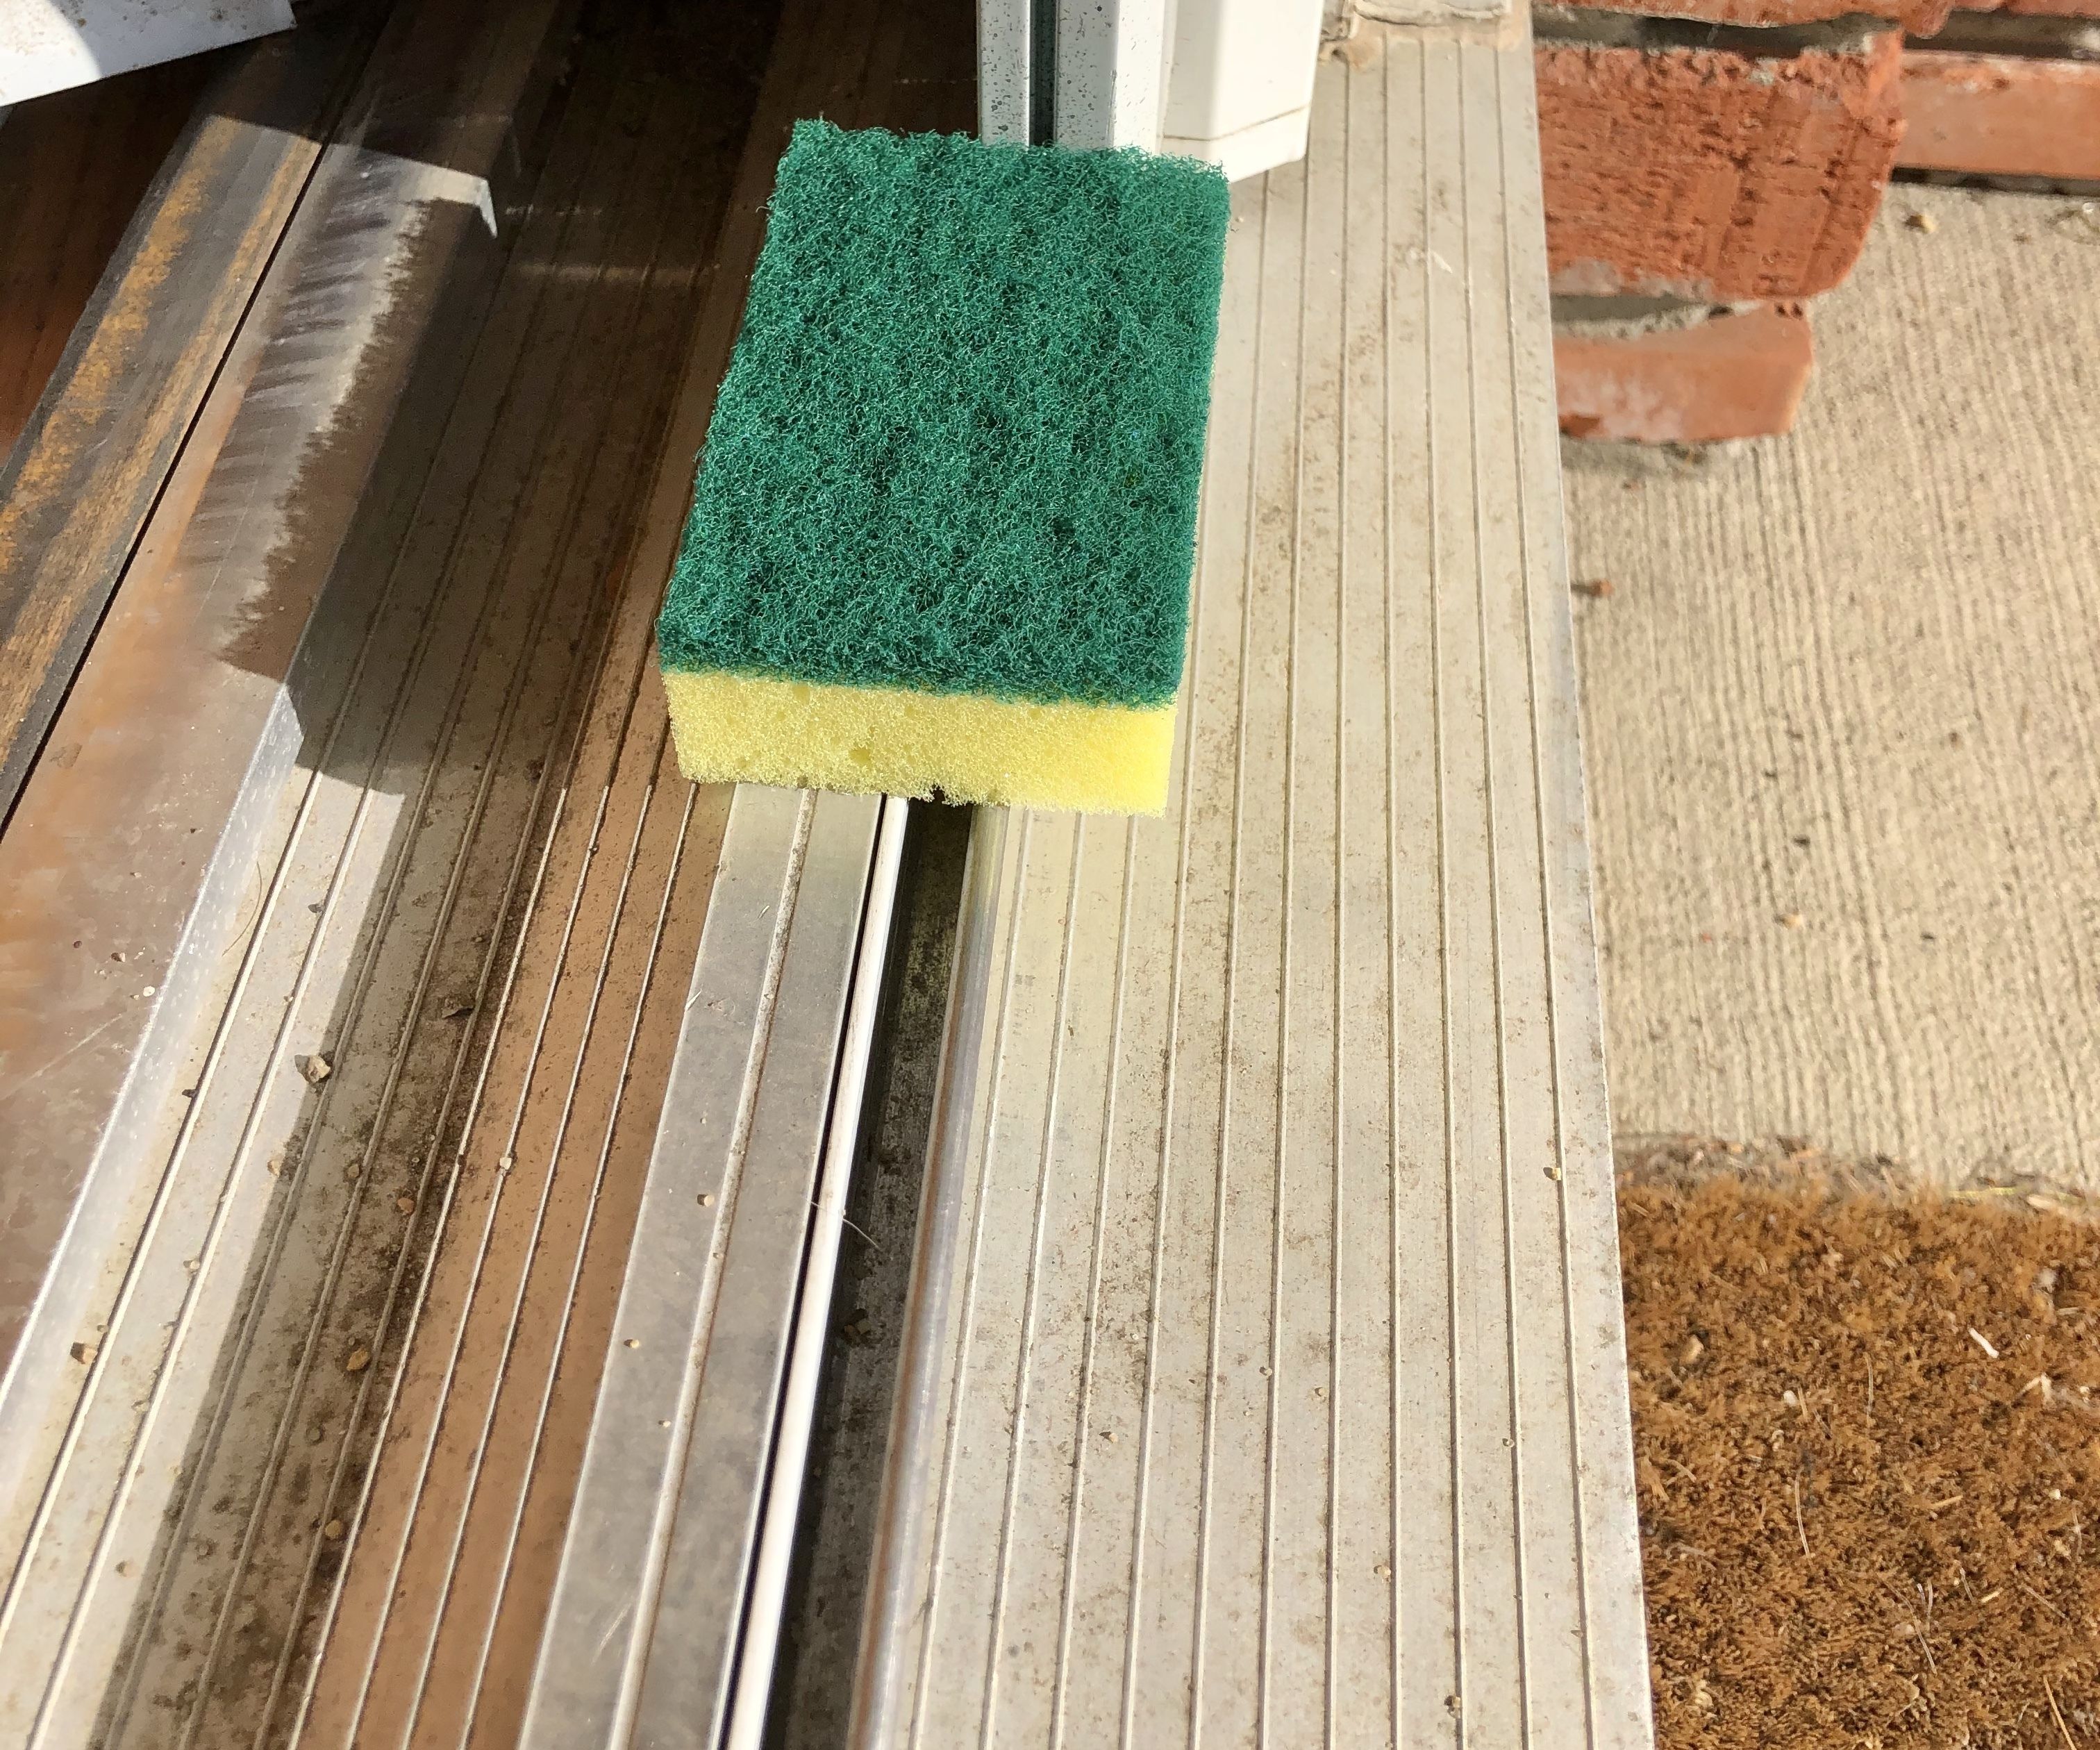 Hack for Cleaning Inside Sliding Window and Door Tracks